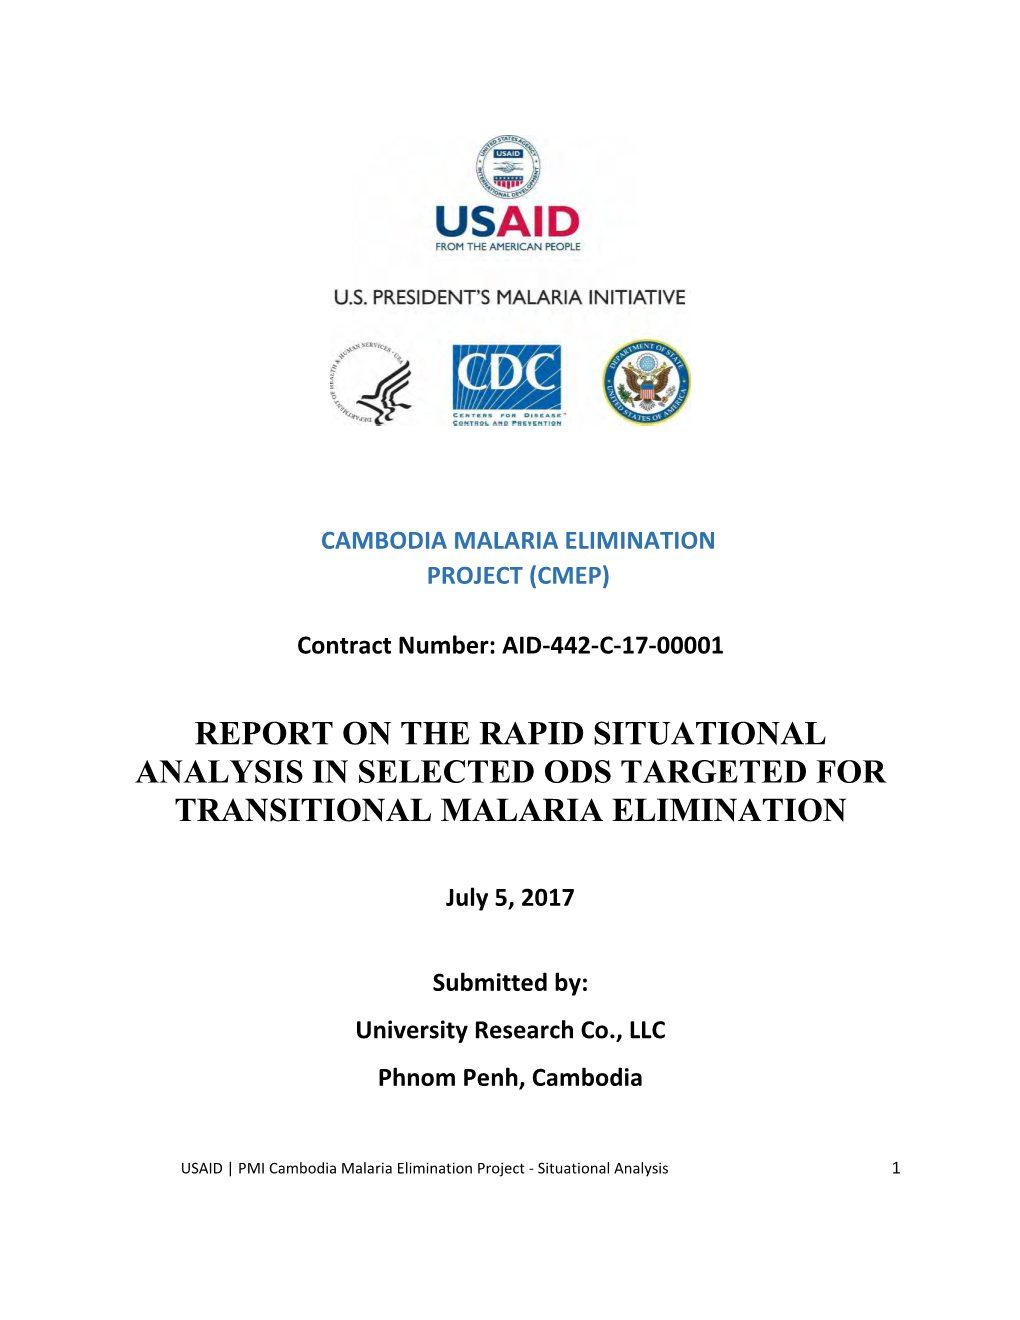 Report on the Rapid Situational Analysis in Selected Ods Targeted for Transitional Malaria Elimination